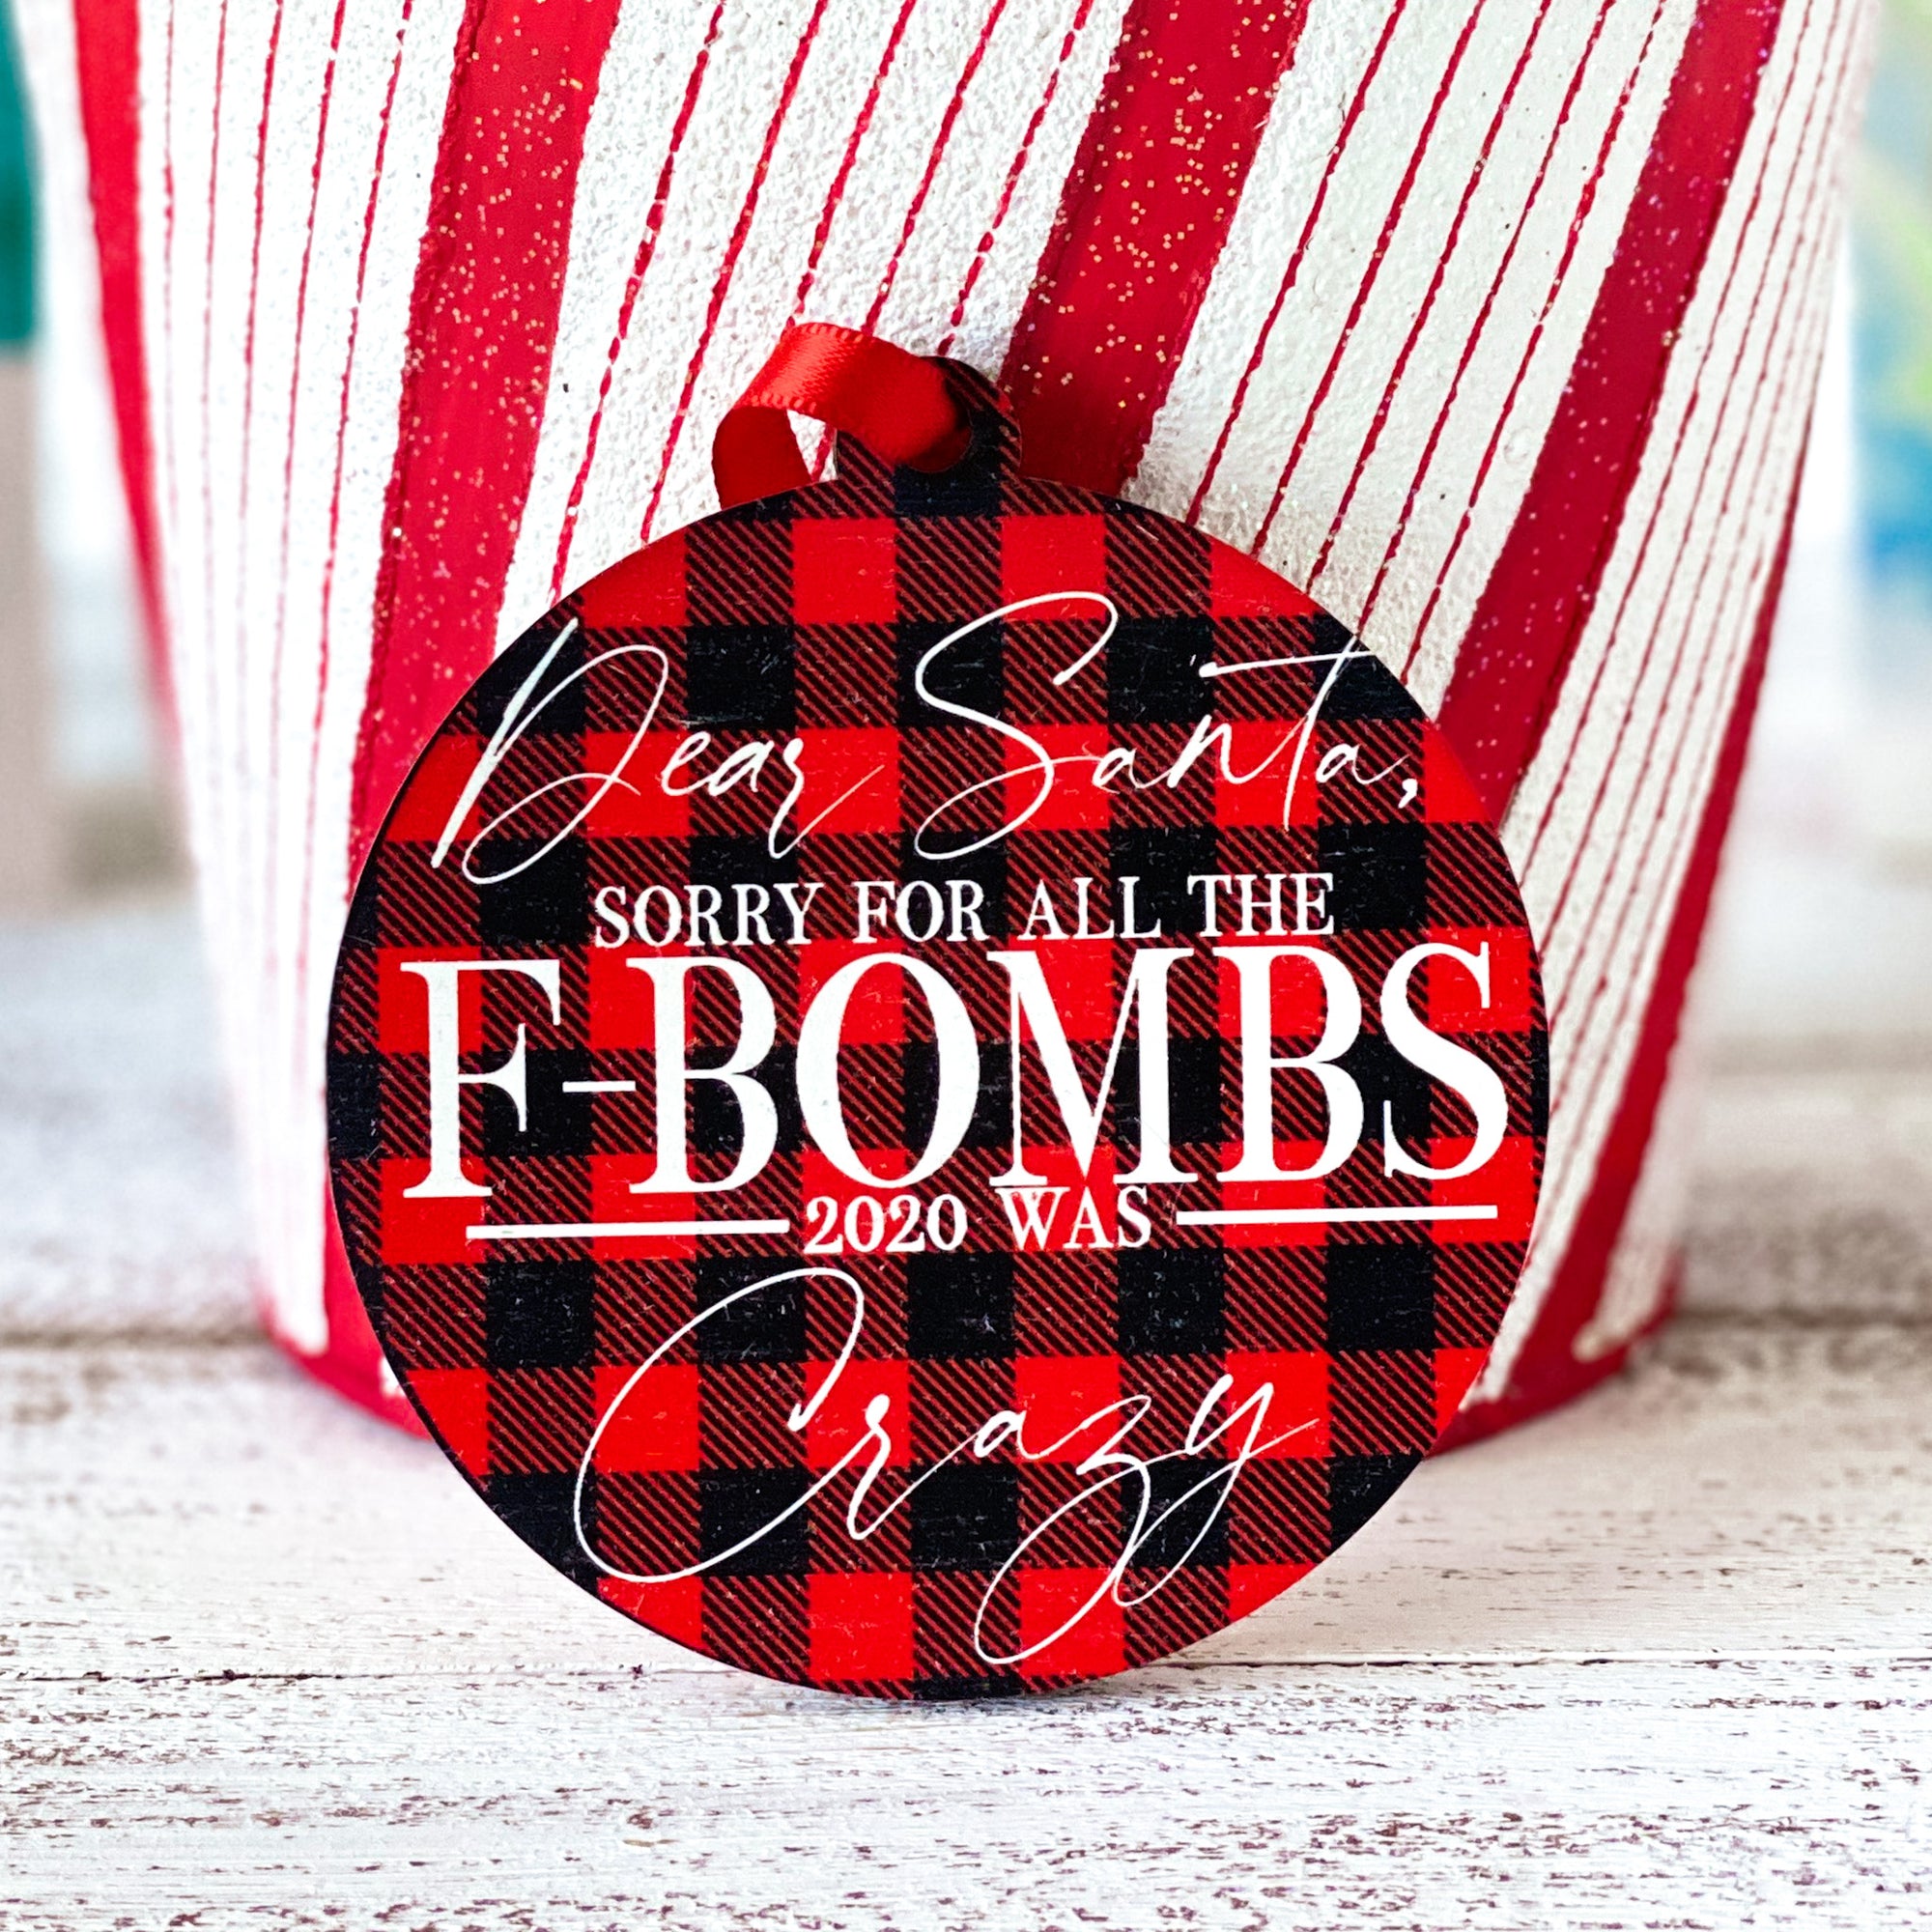 Red & Black Buffalo Plaid, Dear Santa, Sorry For The F-Bombs 2020 Was Crazy Wooden Ornament